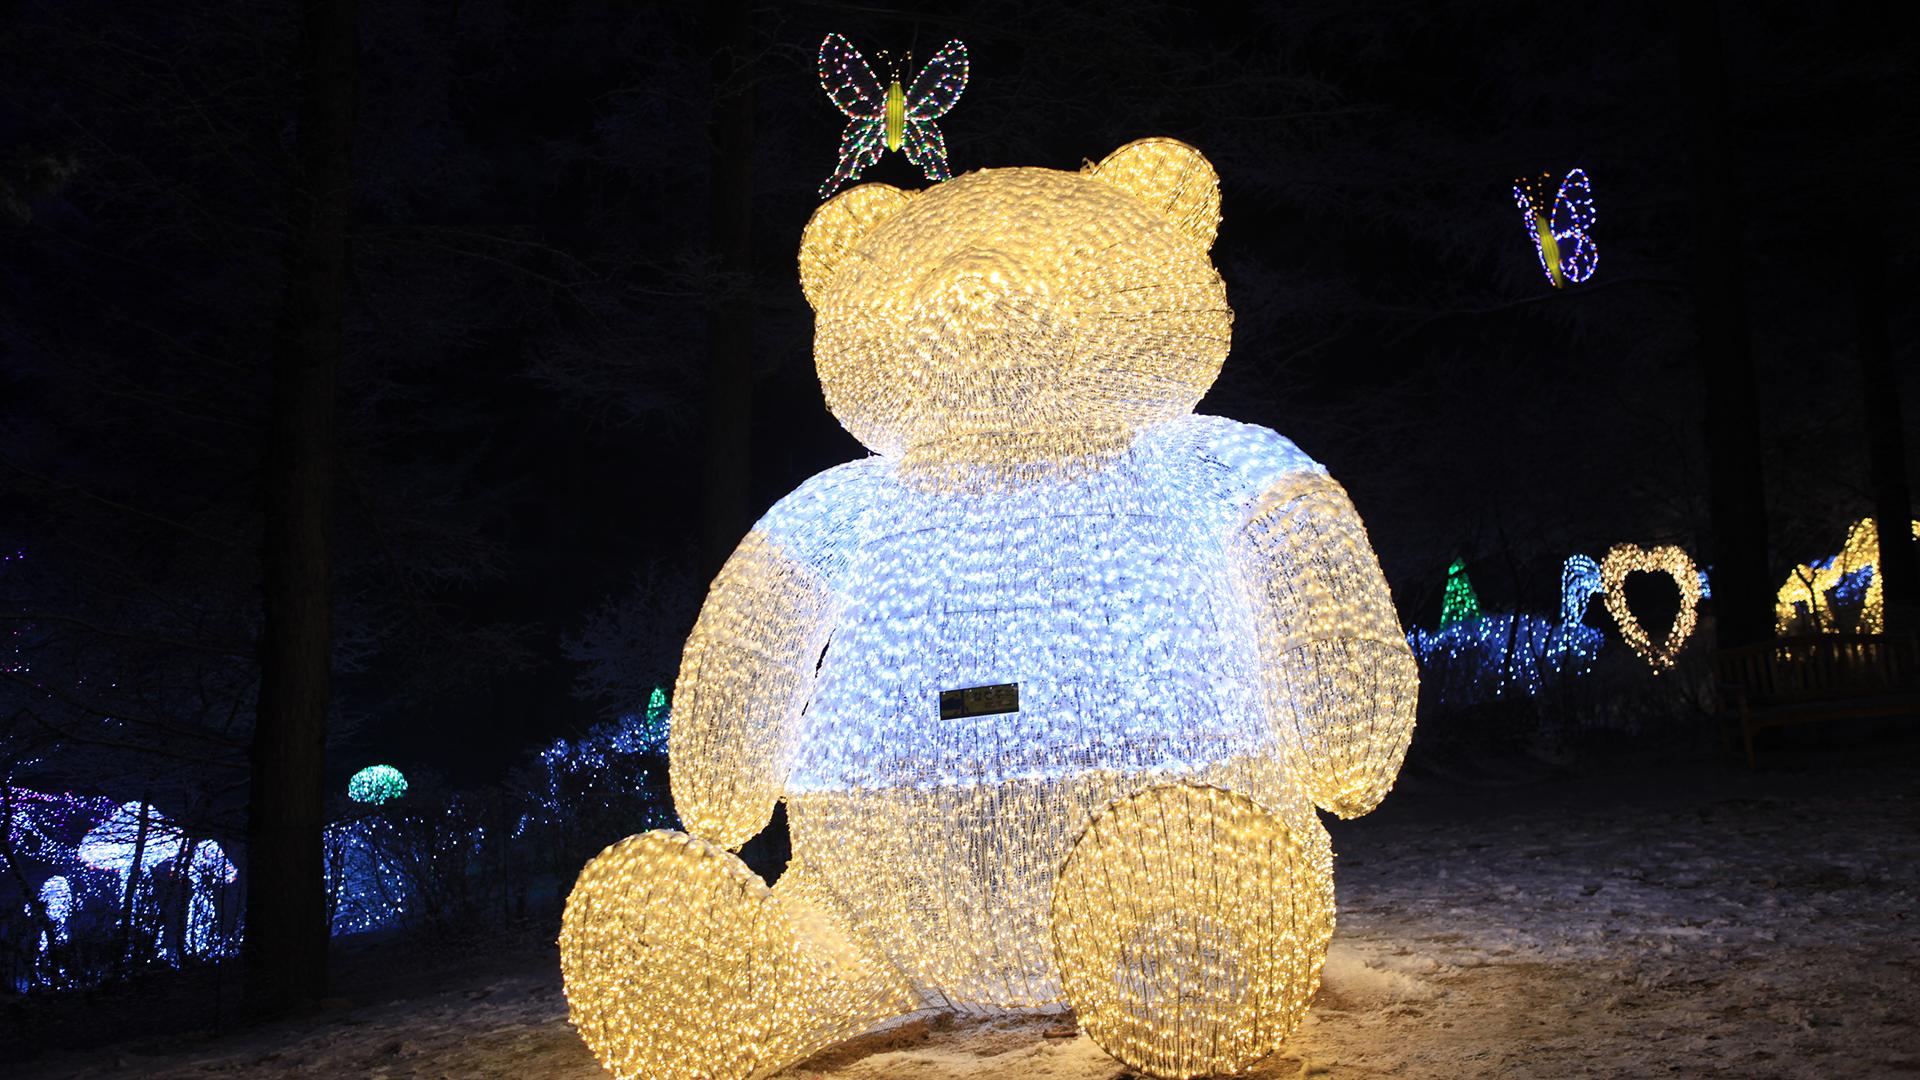 stuffed teddy bear sculpture at Namiseom Island and Morning Calm Arboretum, featuring whimsical world art font and happy event atmosphere.